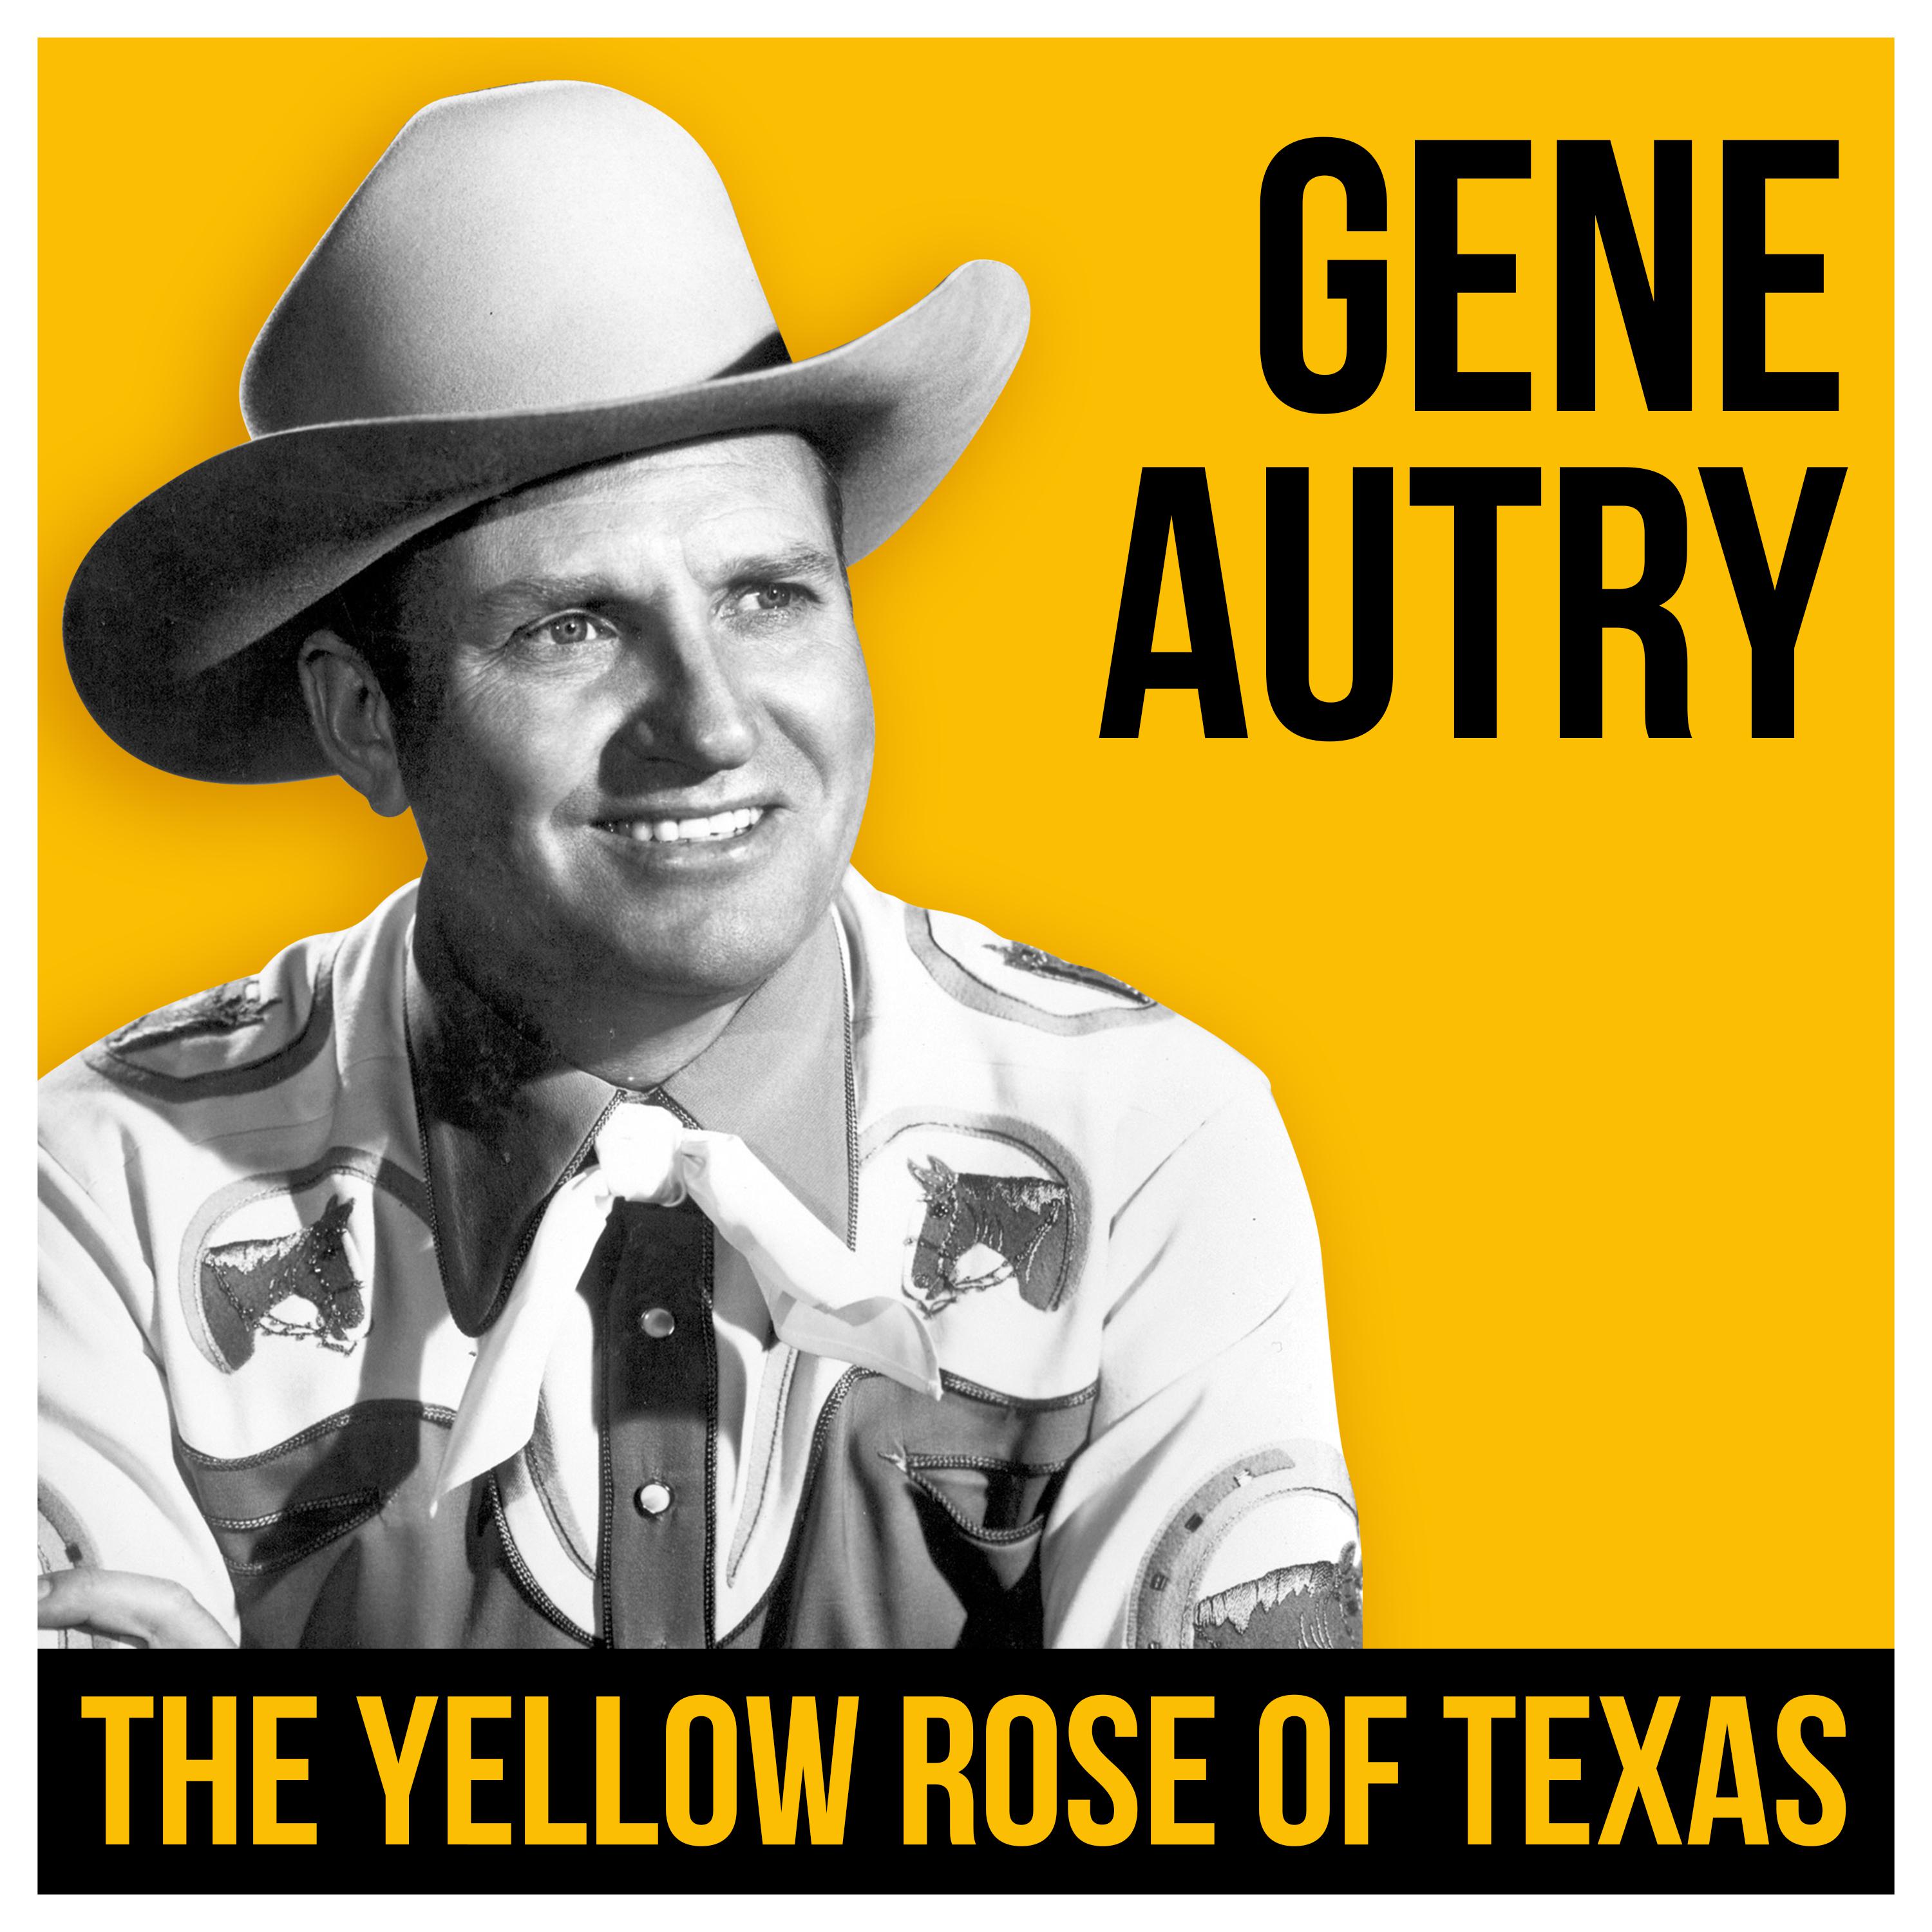 Gene Autry - The Yellow Rose Of Texas